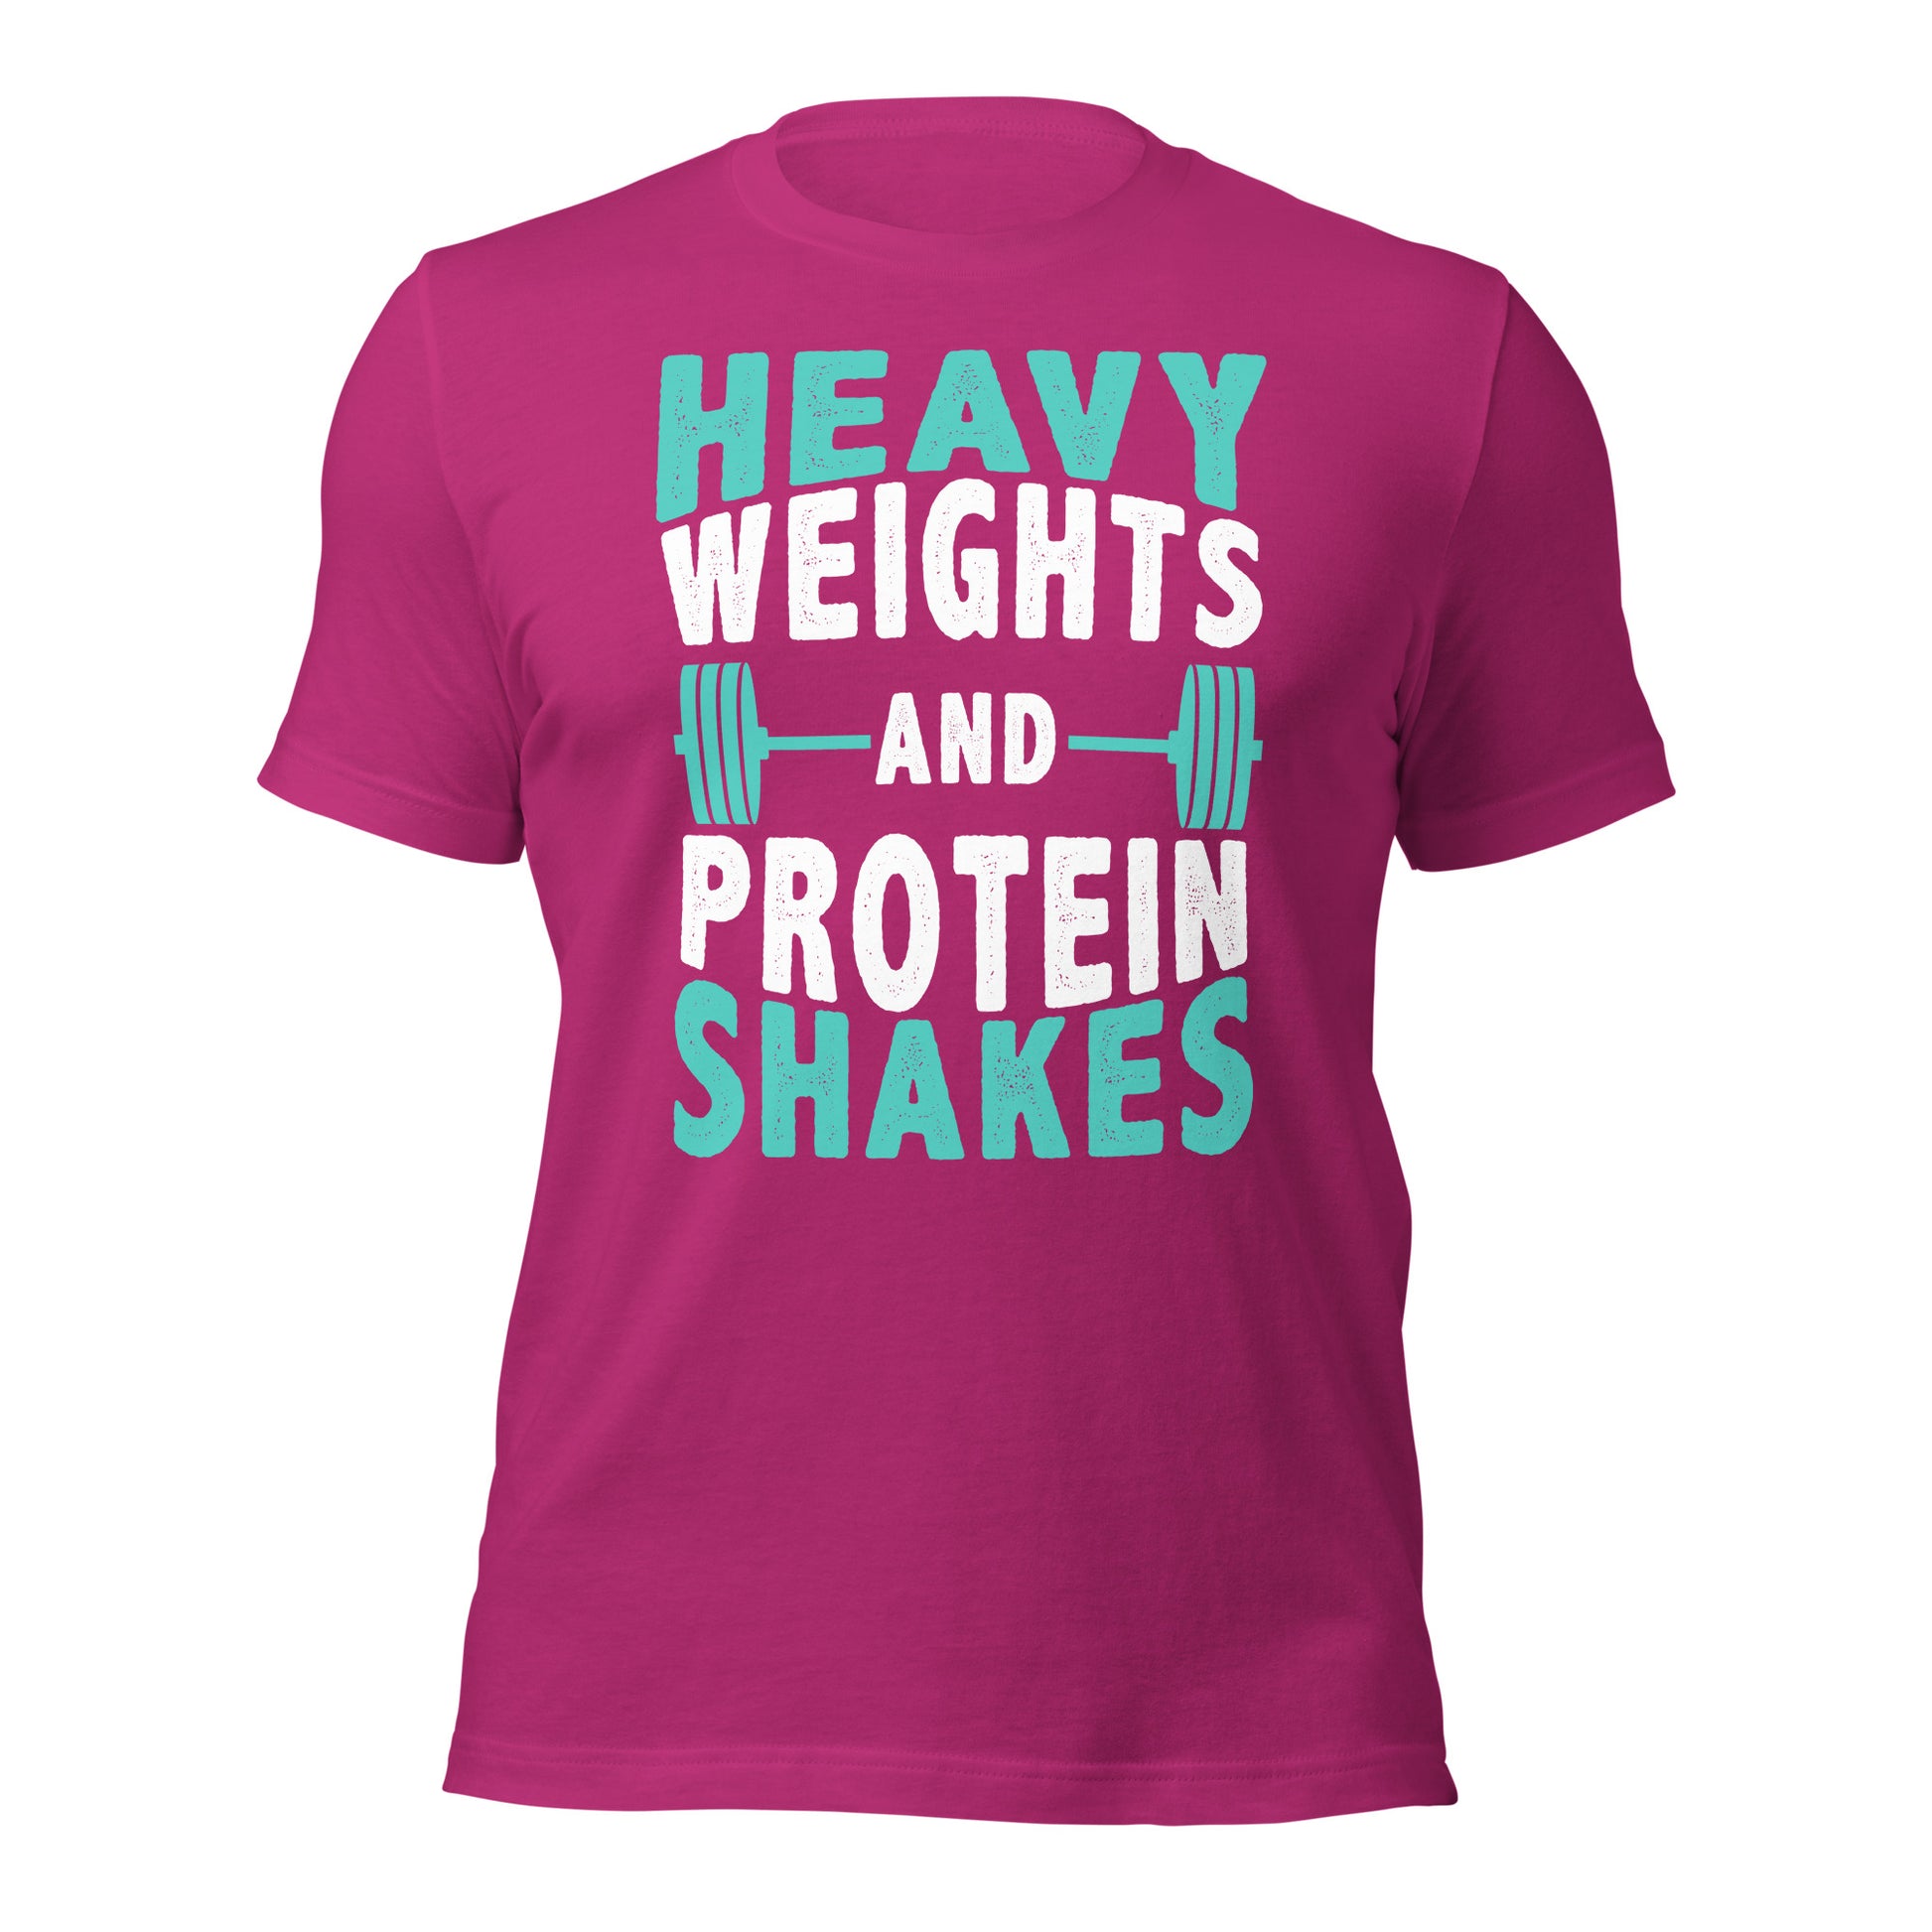 Heavy weights protein shakes tee pink